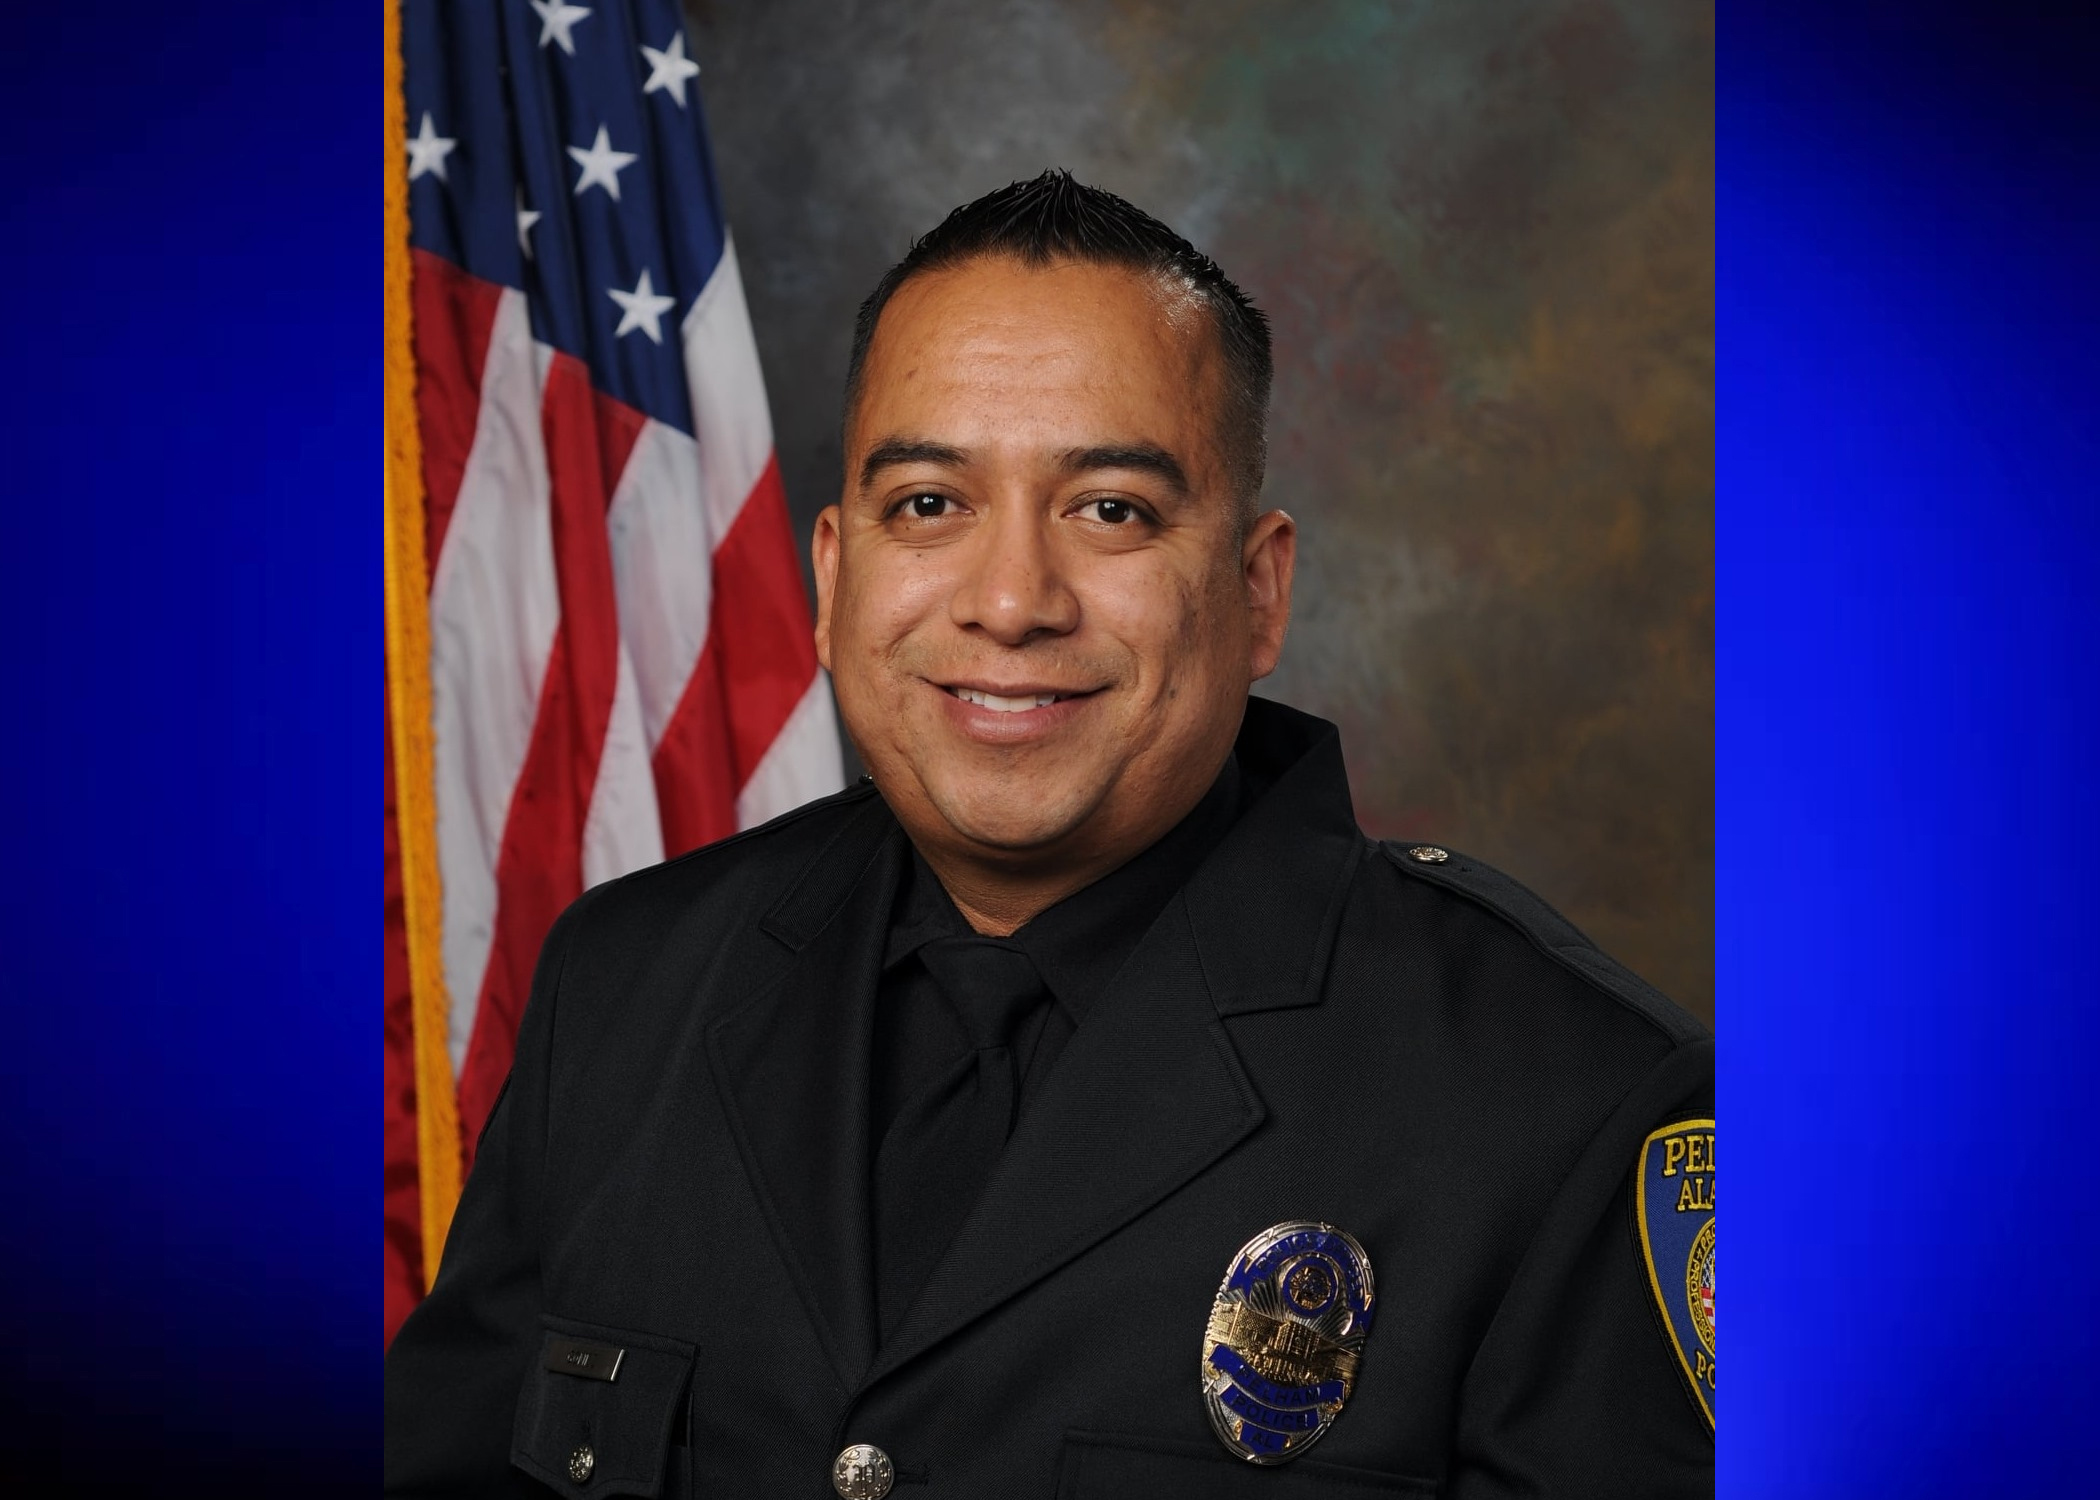 Pelham PD mourns loss of officer who died from COVID-19